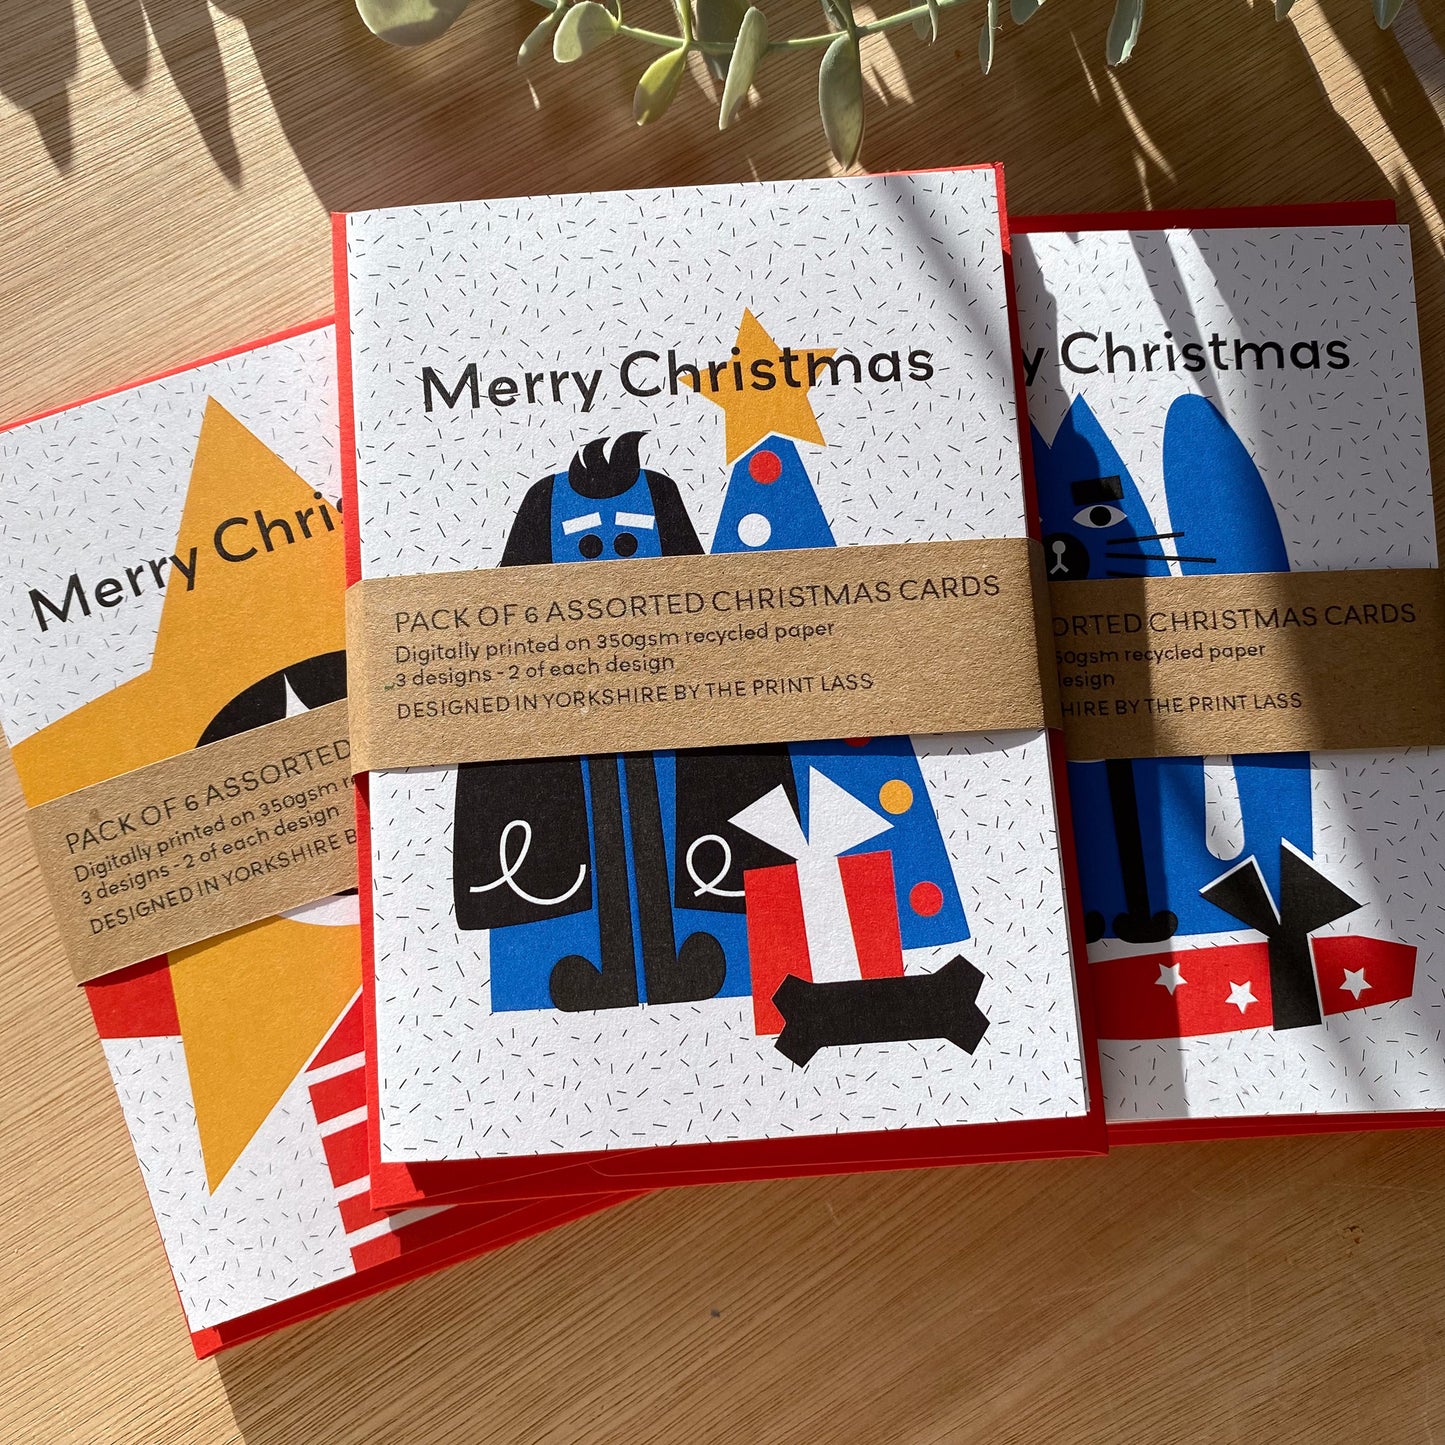 Set of 6 Recycled Christmas Cards - Character designs